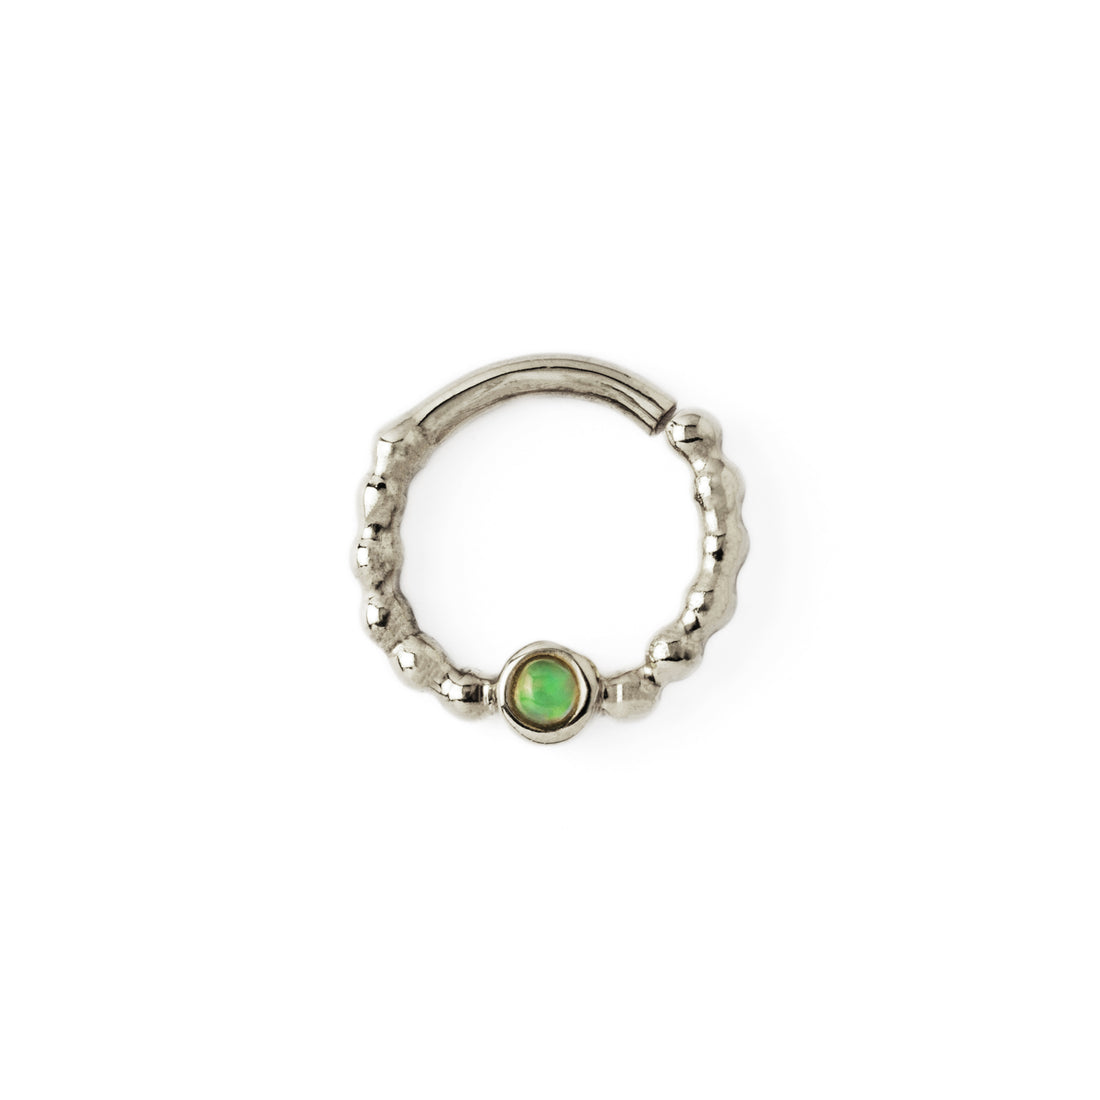 sterling silver dotted septum ring with Opal gemstone frontal view